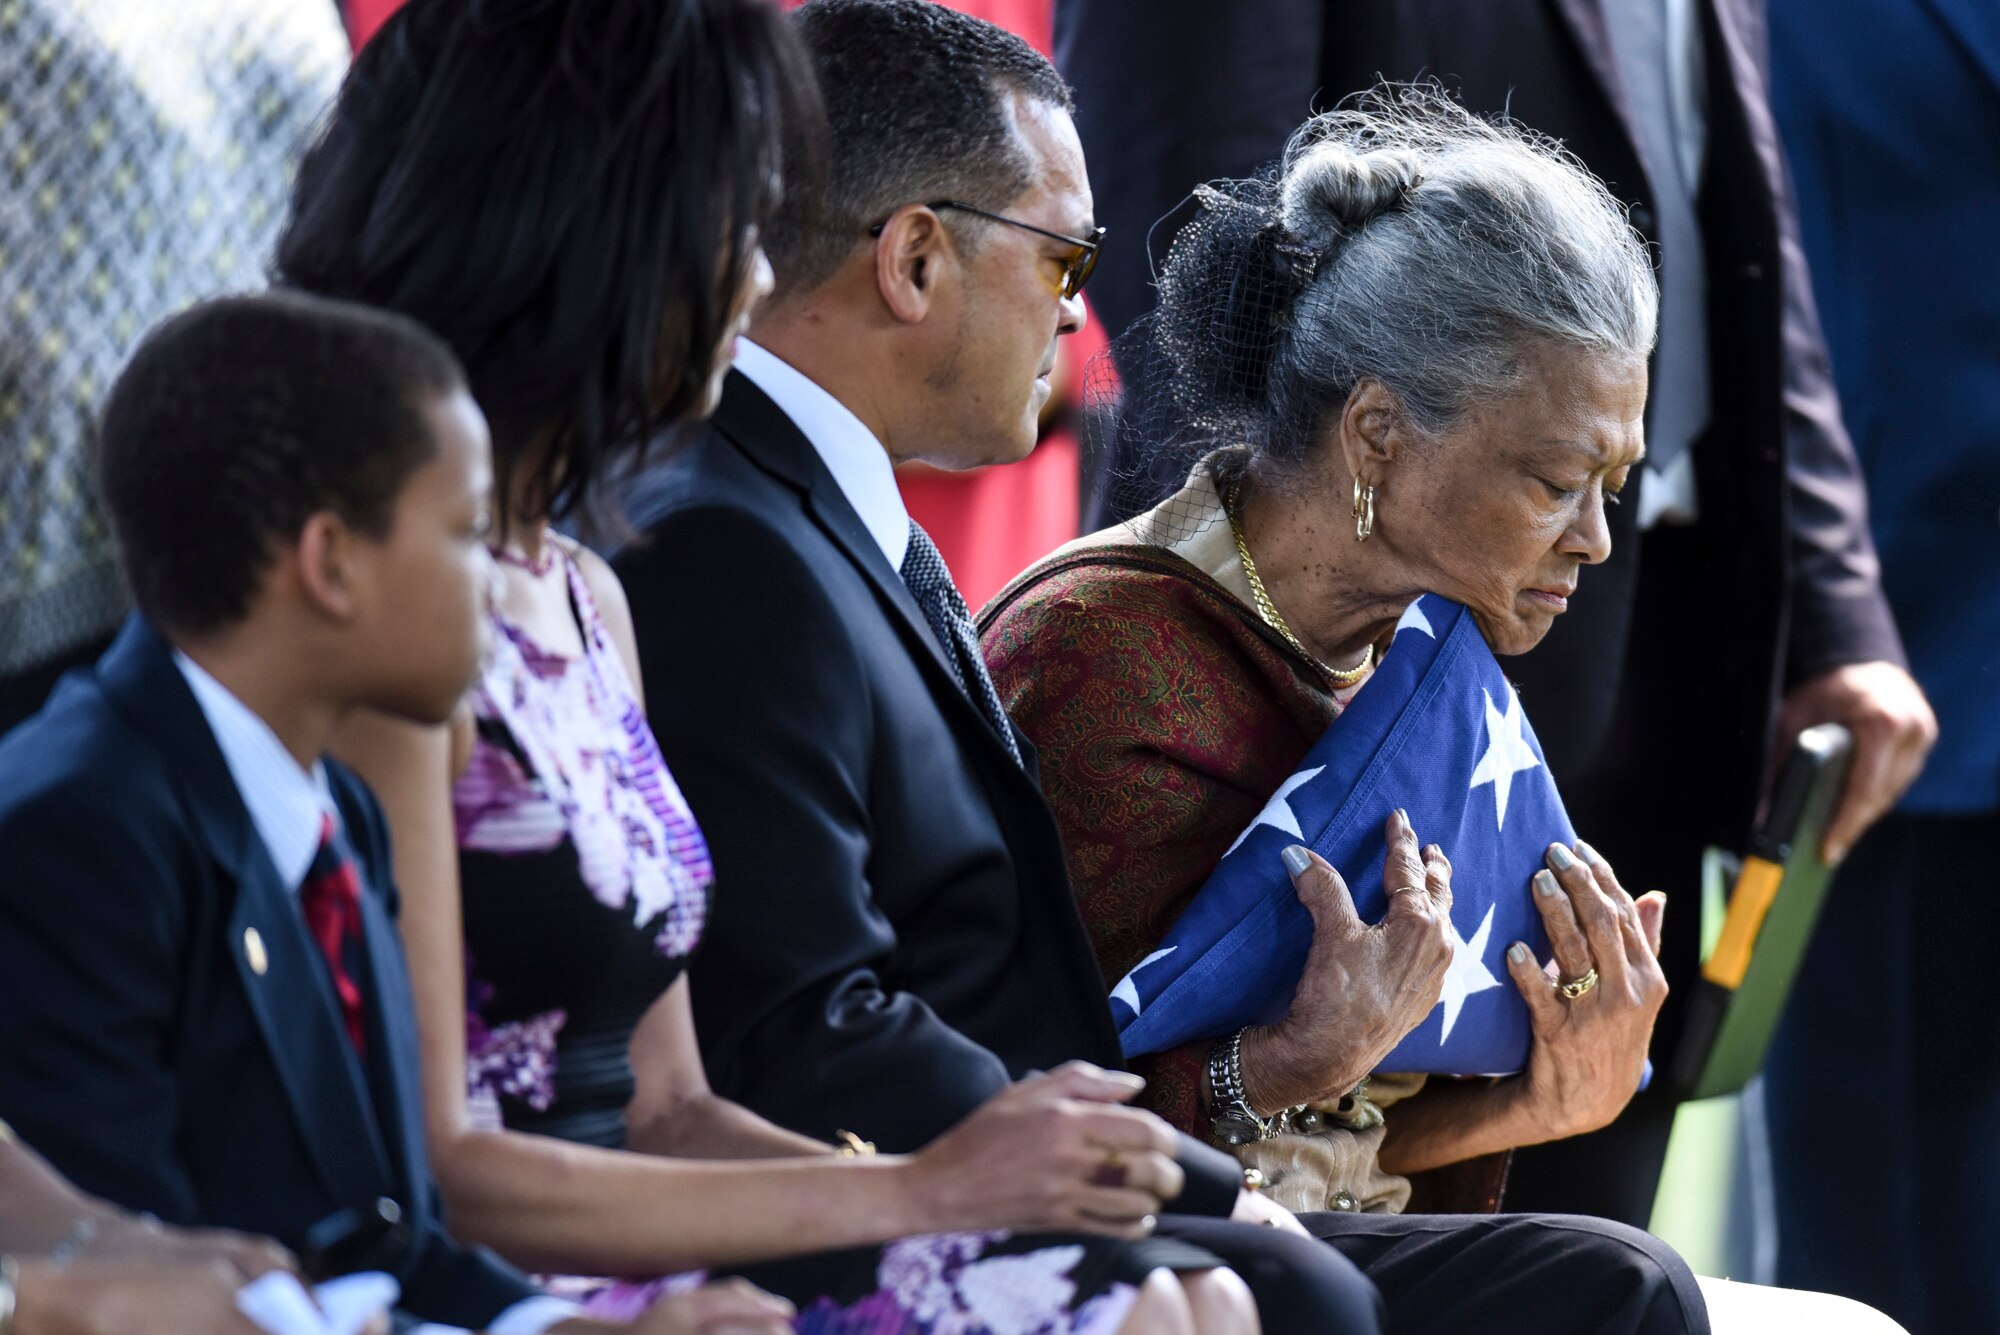 Nola Whitfield hugs the American flag that covered the casket of her husband, former 2nd Lt. Malvin G. Whitfield, during his graveside ceremony at Arlington National Cemetery, Va., June 8, 2016. Whitfield served in the Army Air Forces as a Tuskegee Airman, and is survived by his daughters Nyna Konishi and Fredricka Whitfield, son Malvin Whitfield Jr., and wife Nola Whitfield. (U.S. Air Force photo/Tech. Sgt. Anthony Nelson Jr.)